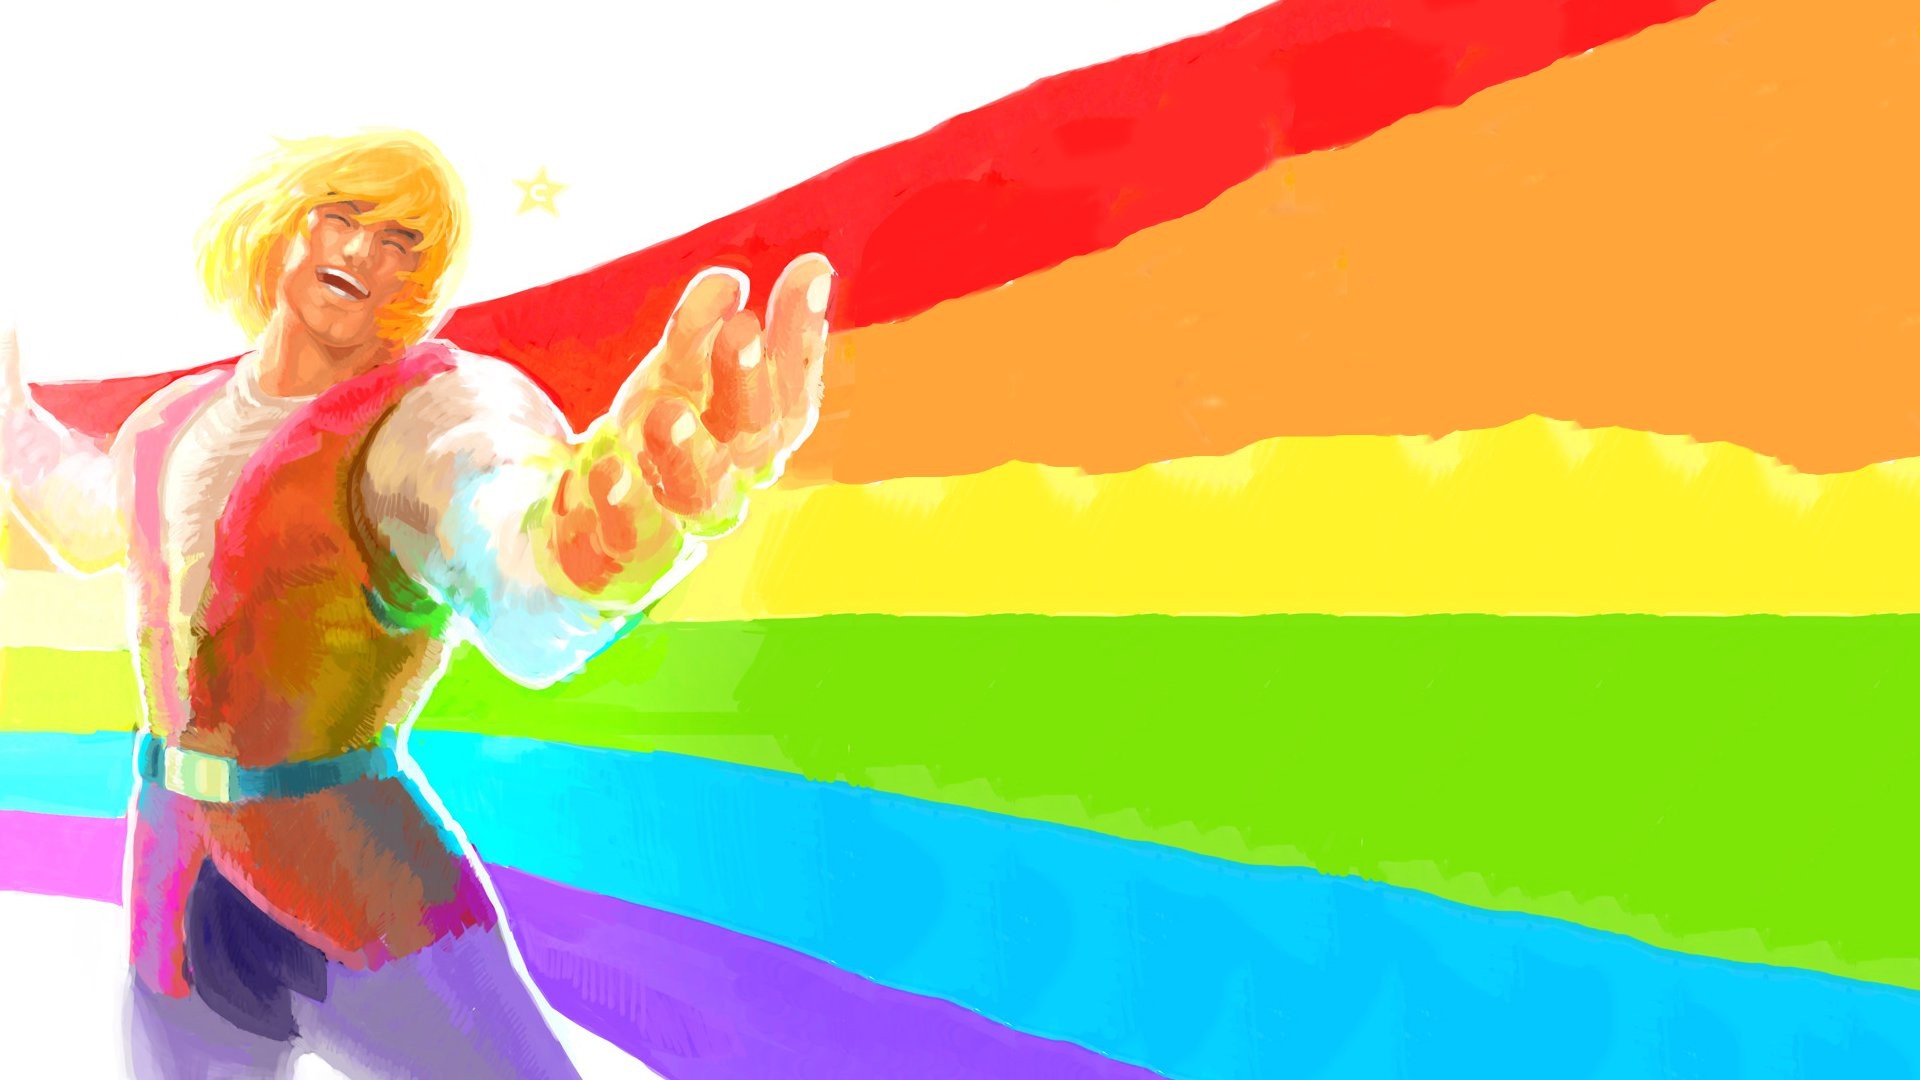 General 1920x1080 He-Man rainbows He-Man and the Masters of the Universe TV series fan art digital art